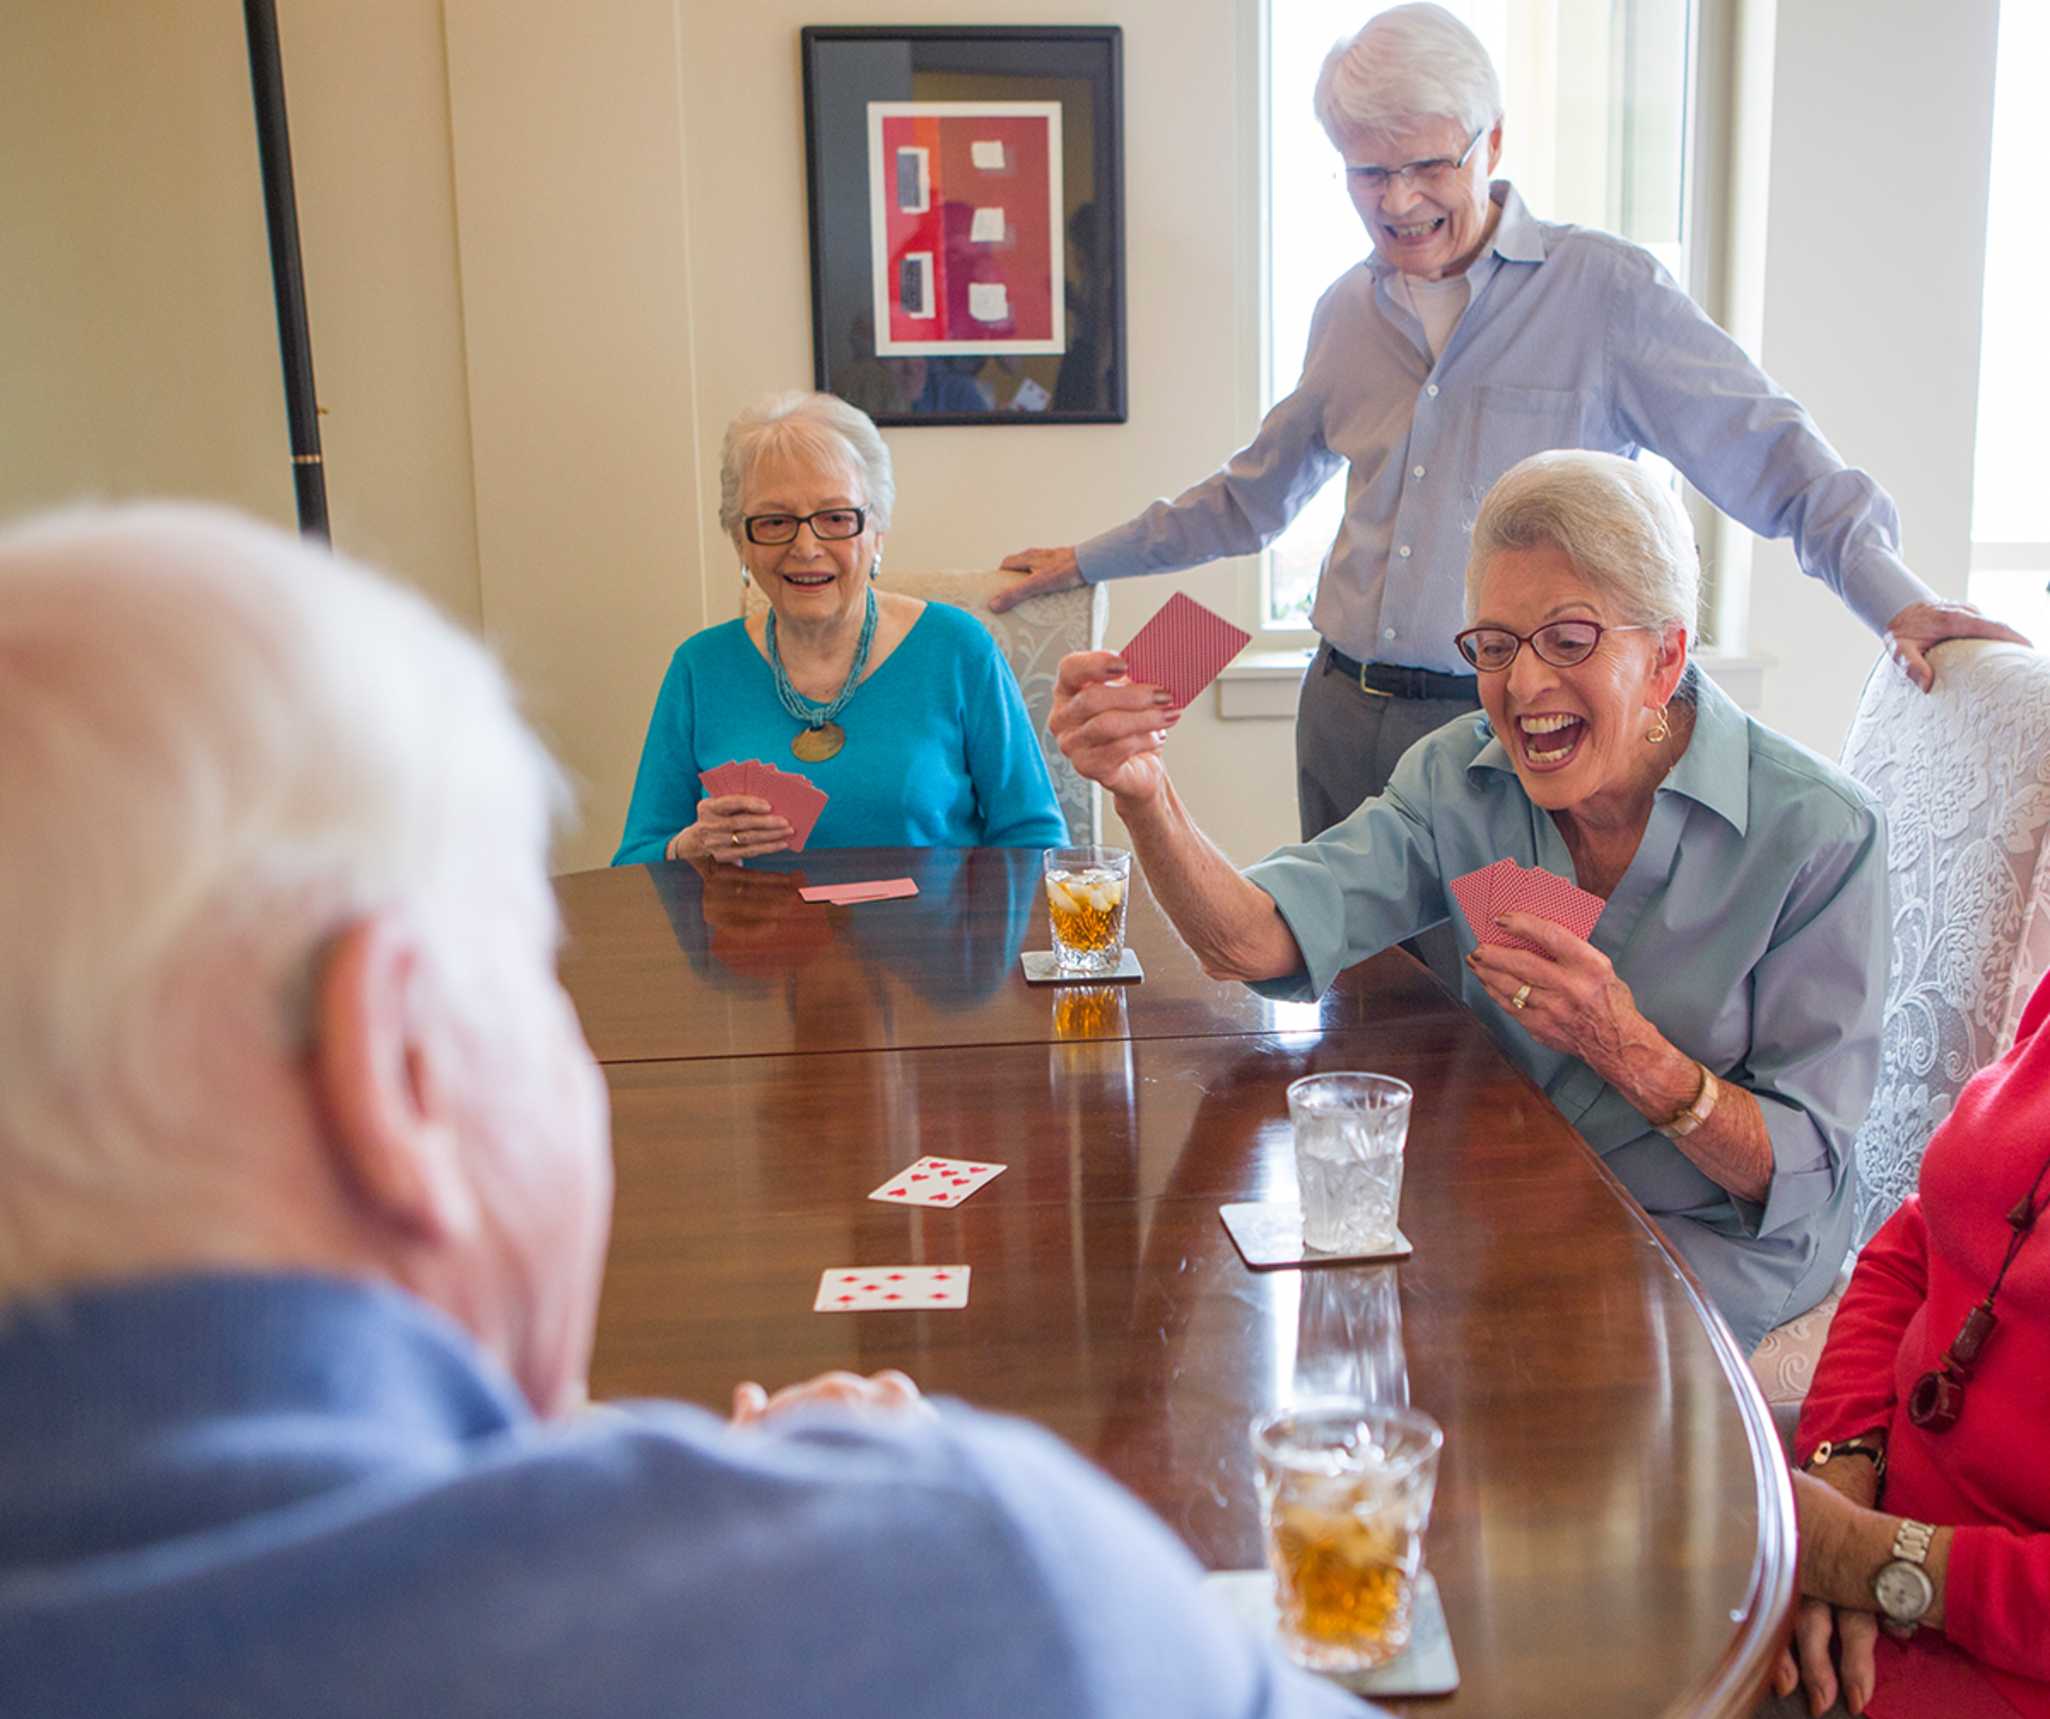 senior community residents play an exciting card game together